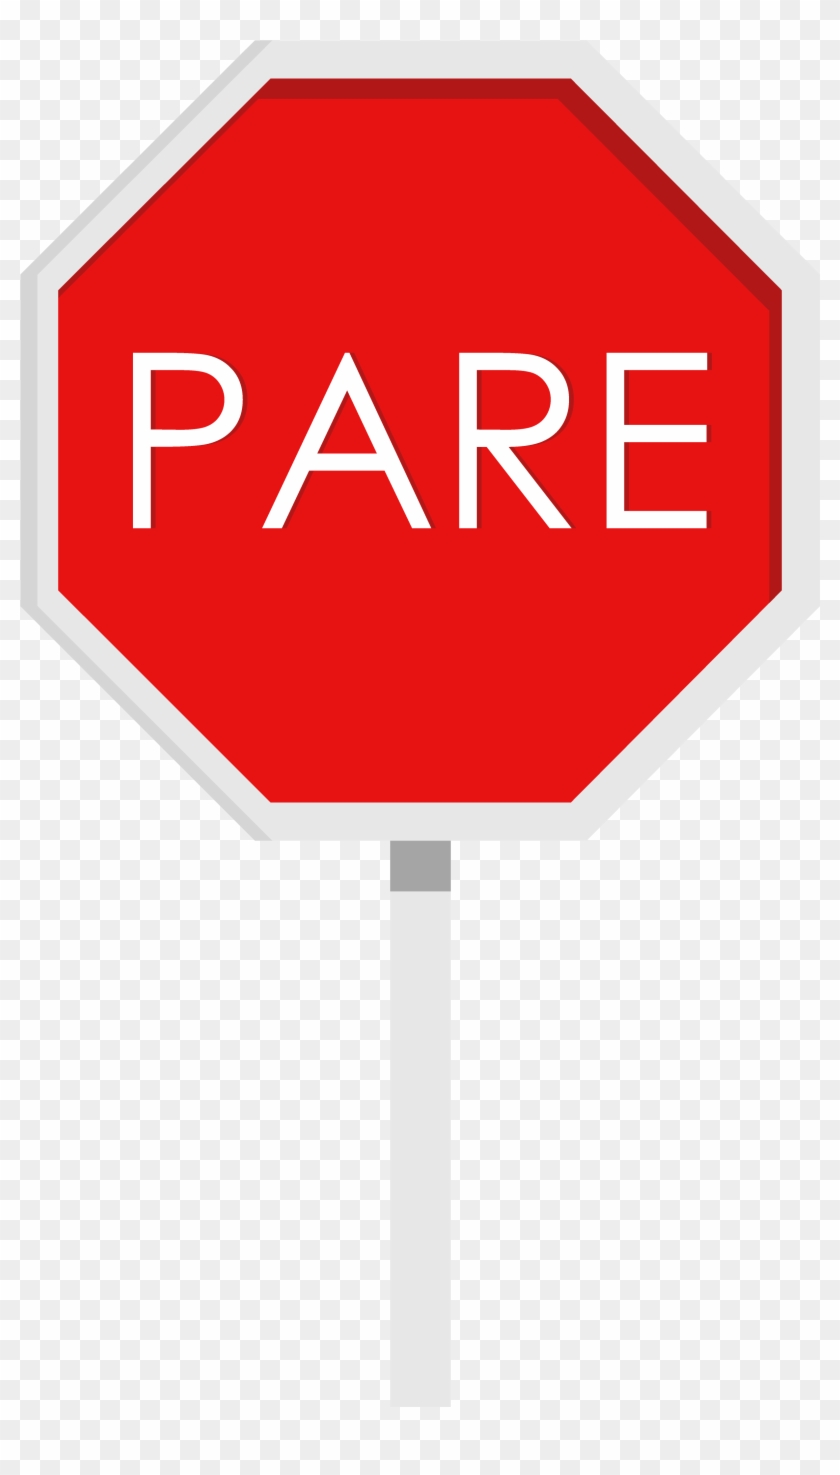 Pare - Stop Sign Clipart #4275977